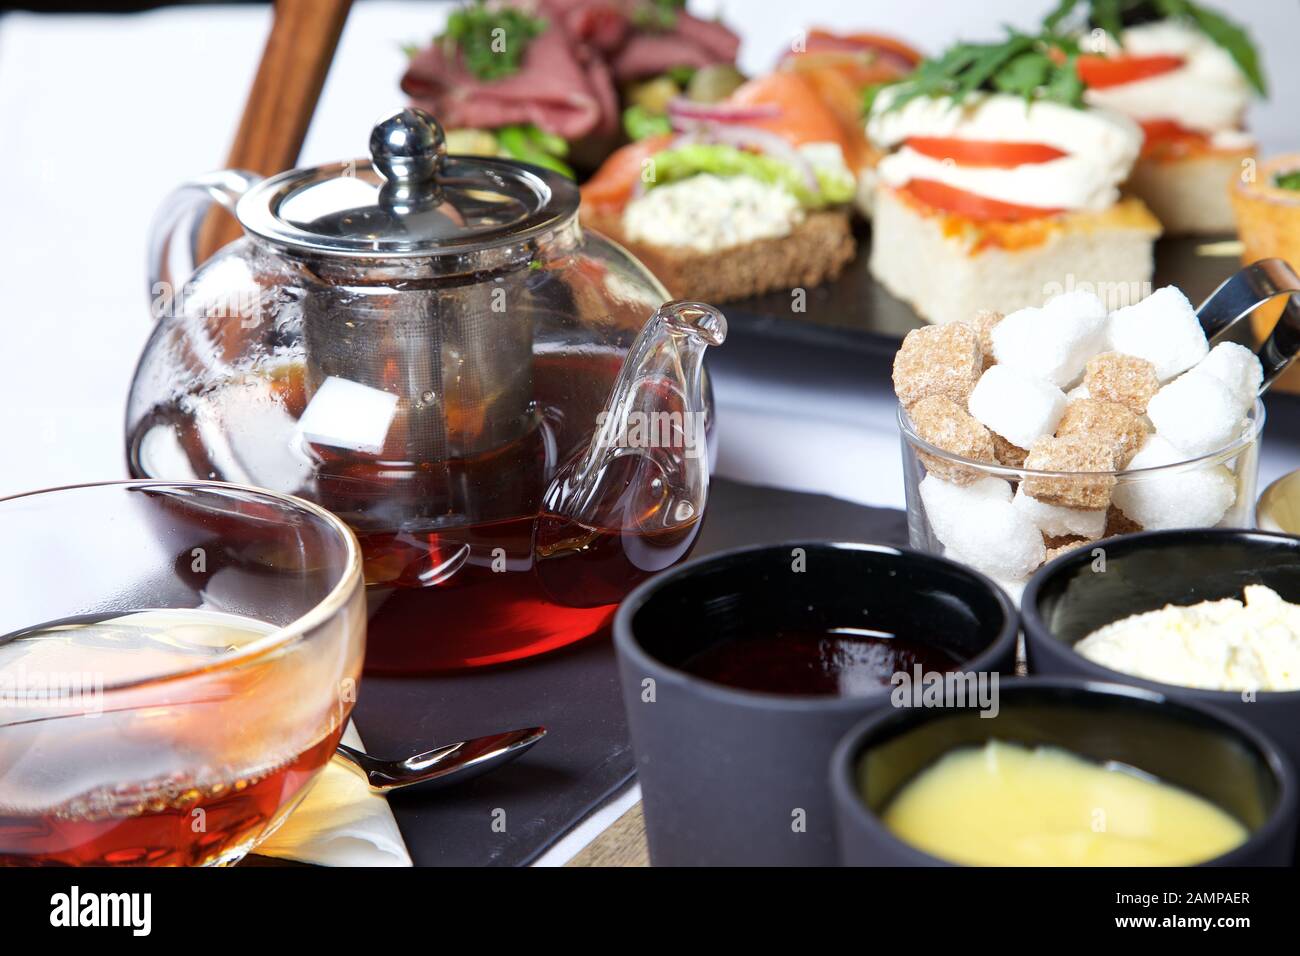 Afternoon tea table setting. Stock Photo